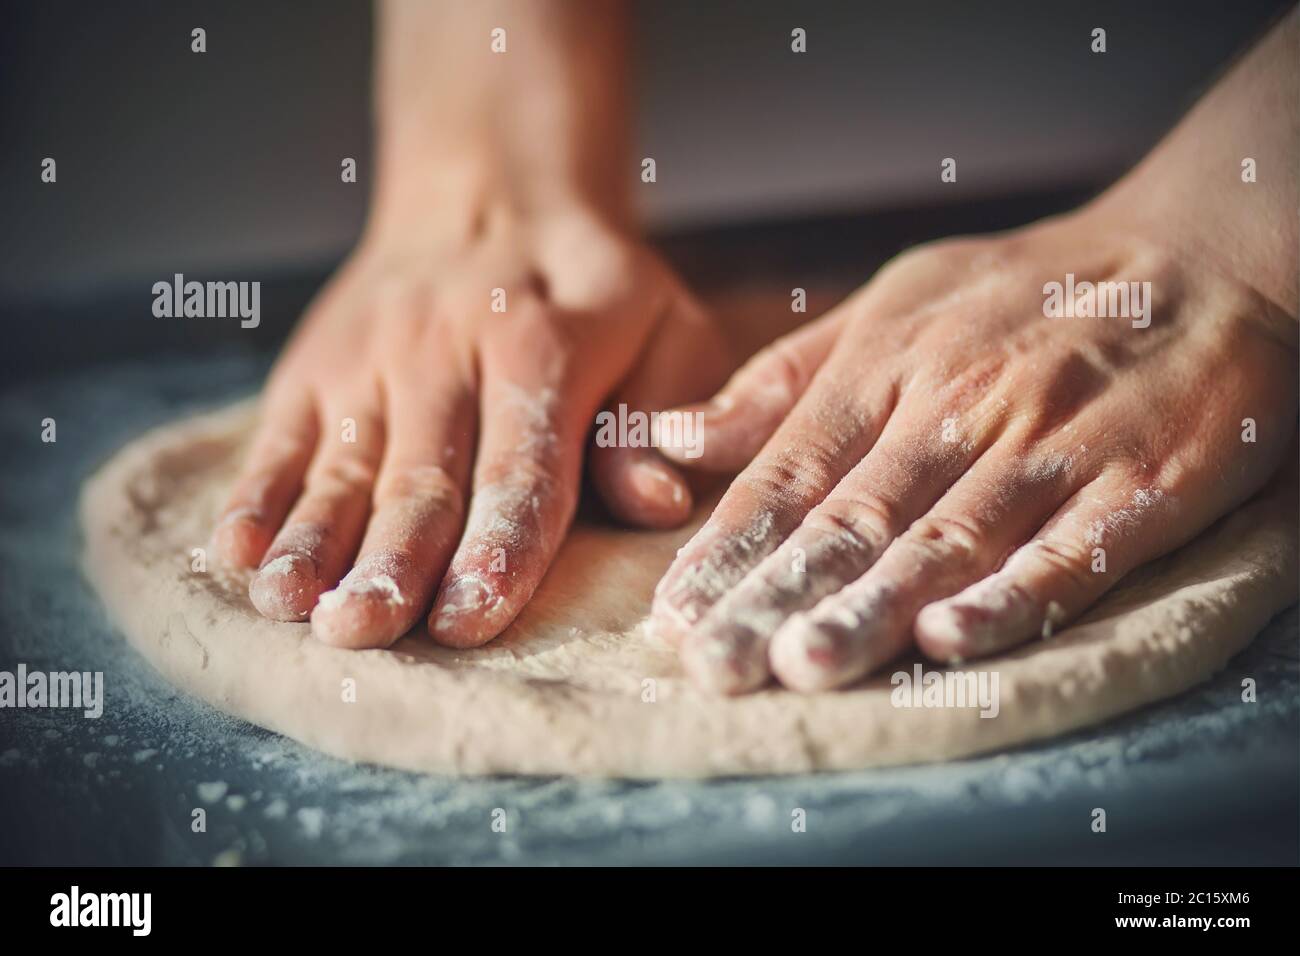 A man with his hands rolls out homemade pizza dough, lying on a dark baking tray and illuminated by light. Cooking at home. Stock Photo